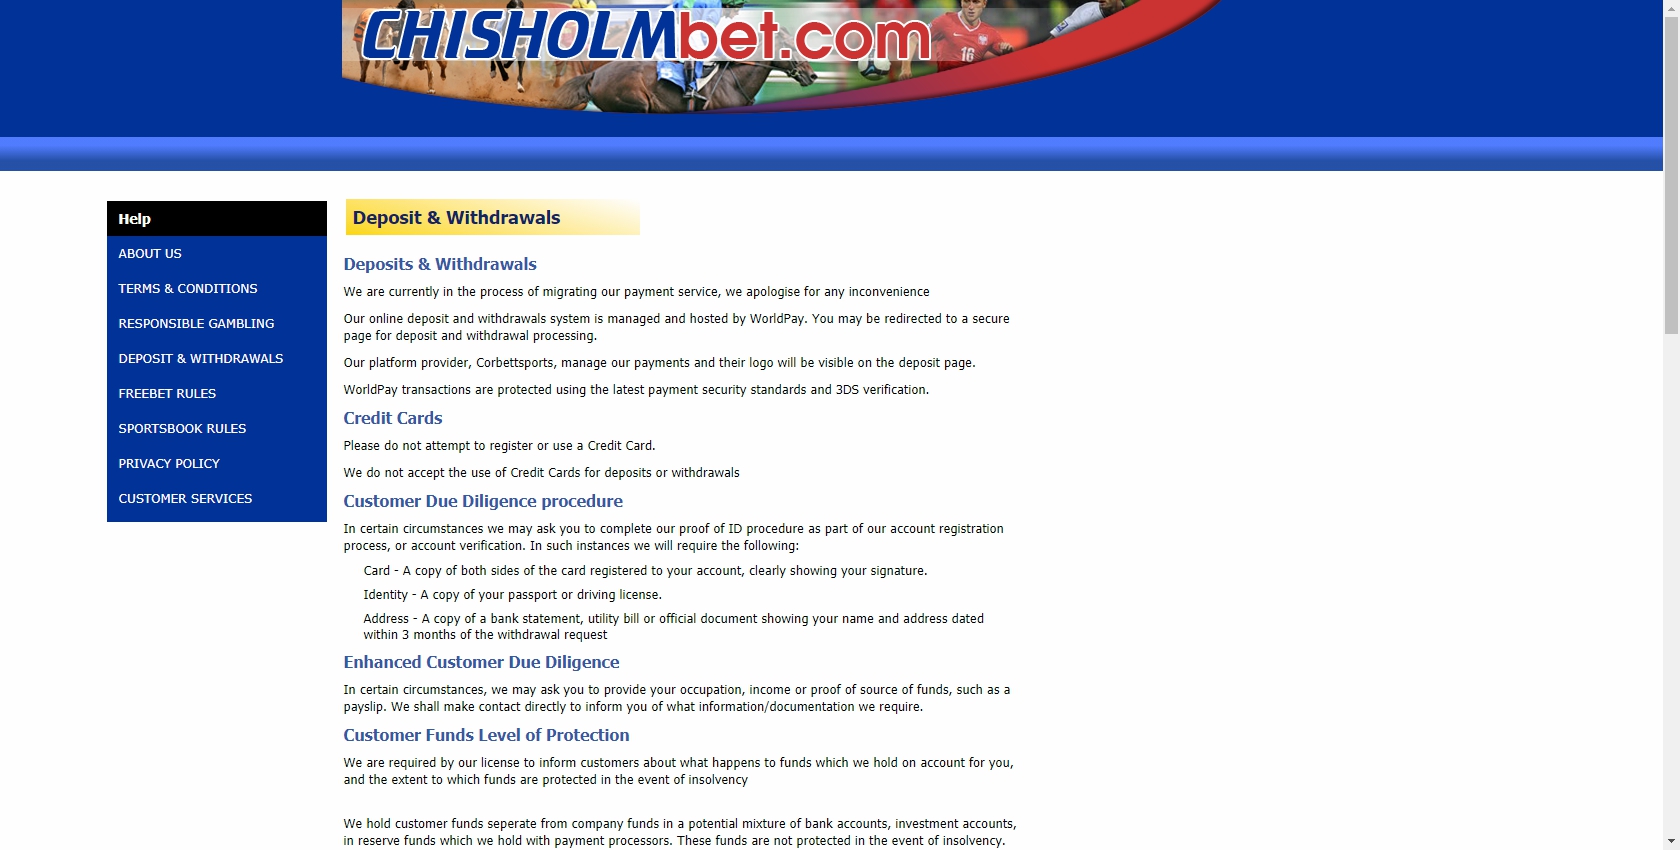 Chis Holm Bet Casino Payment Methods